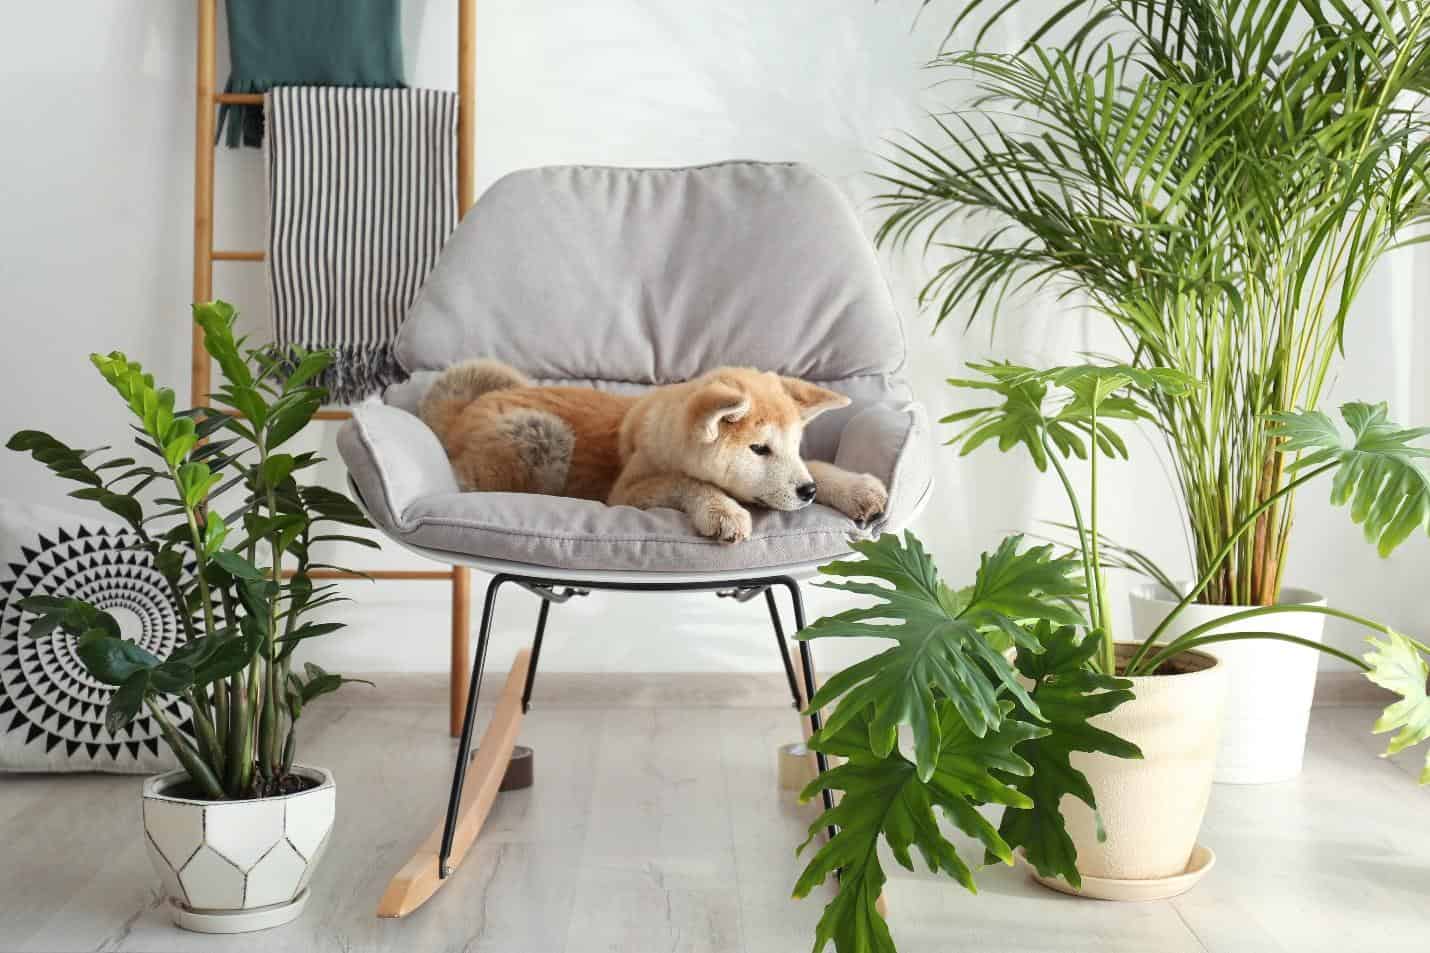 Pet-Friendly House Plants That Add Greenery Without The Worry